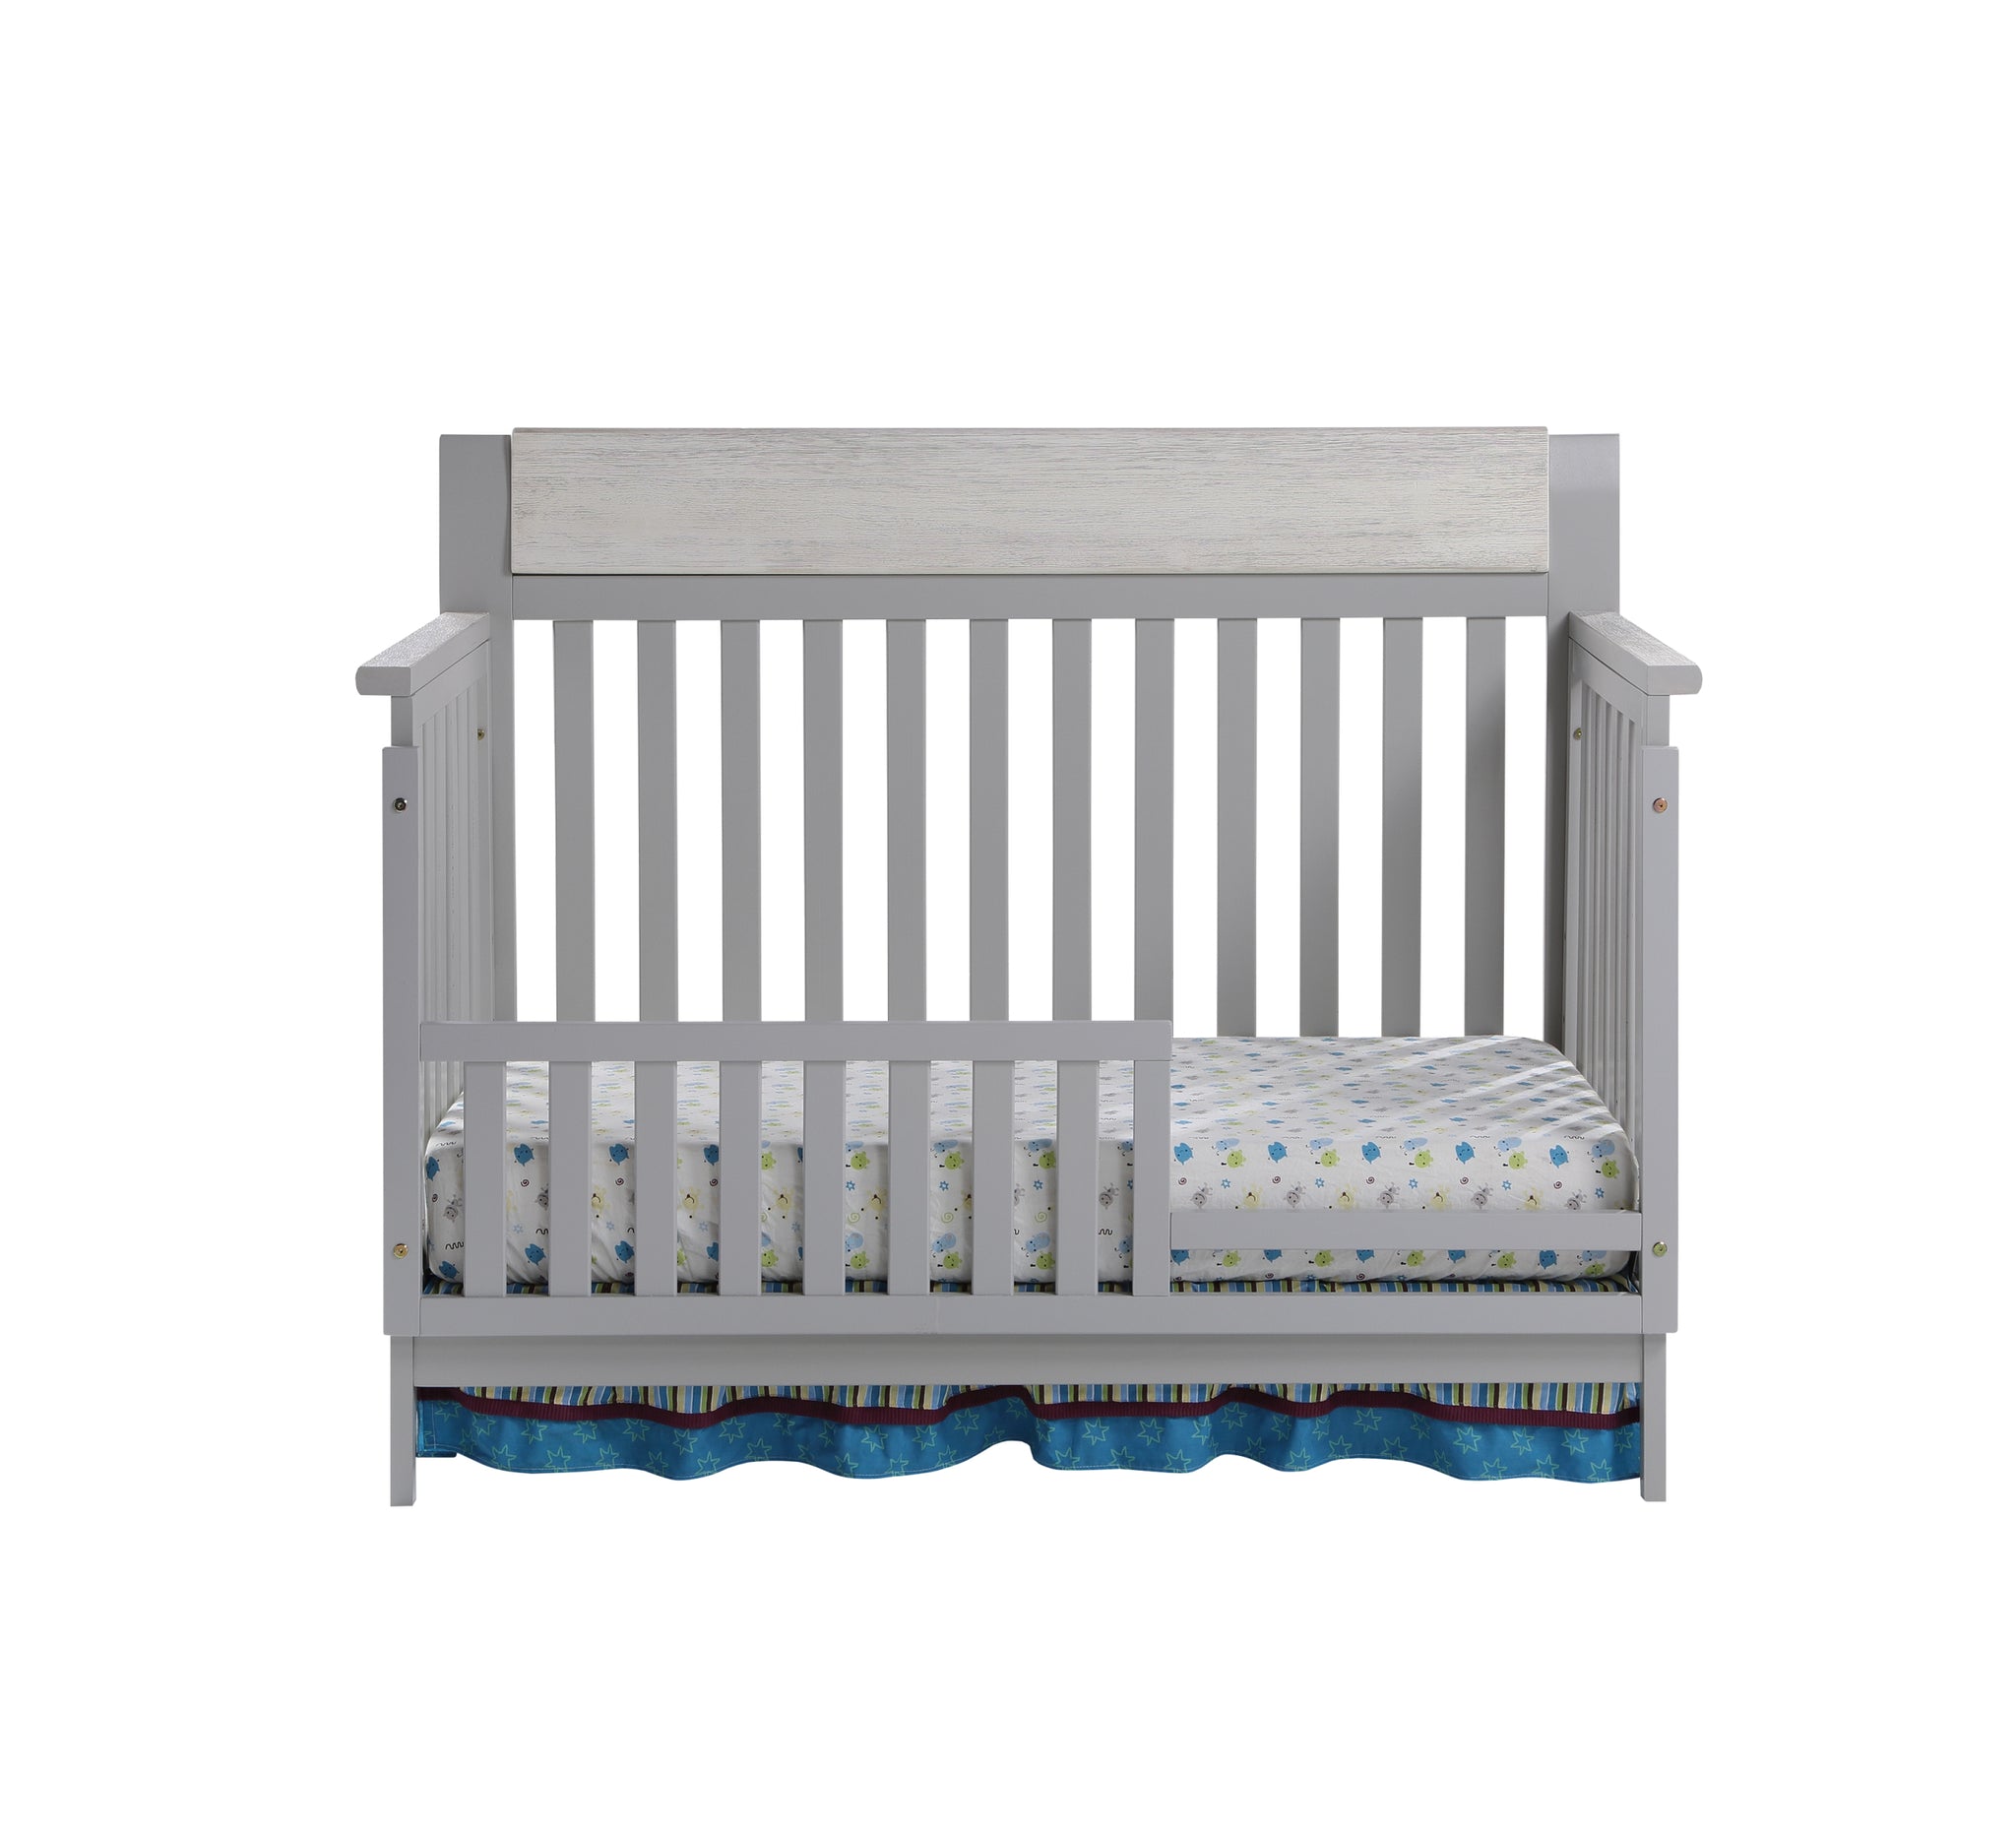 Hayes 4 in 1 Convertible Crib Gray Weathered Granite gray-solid wood